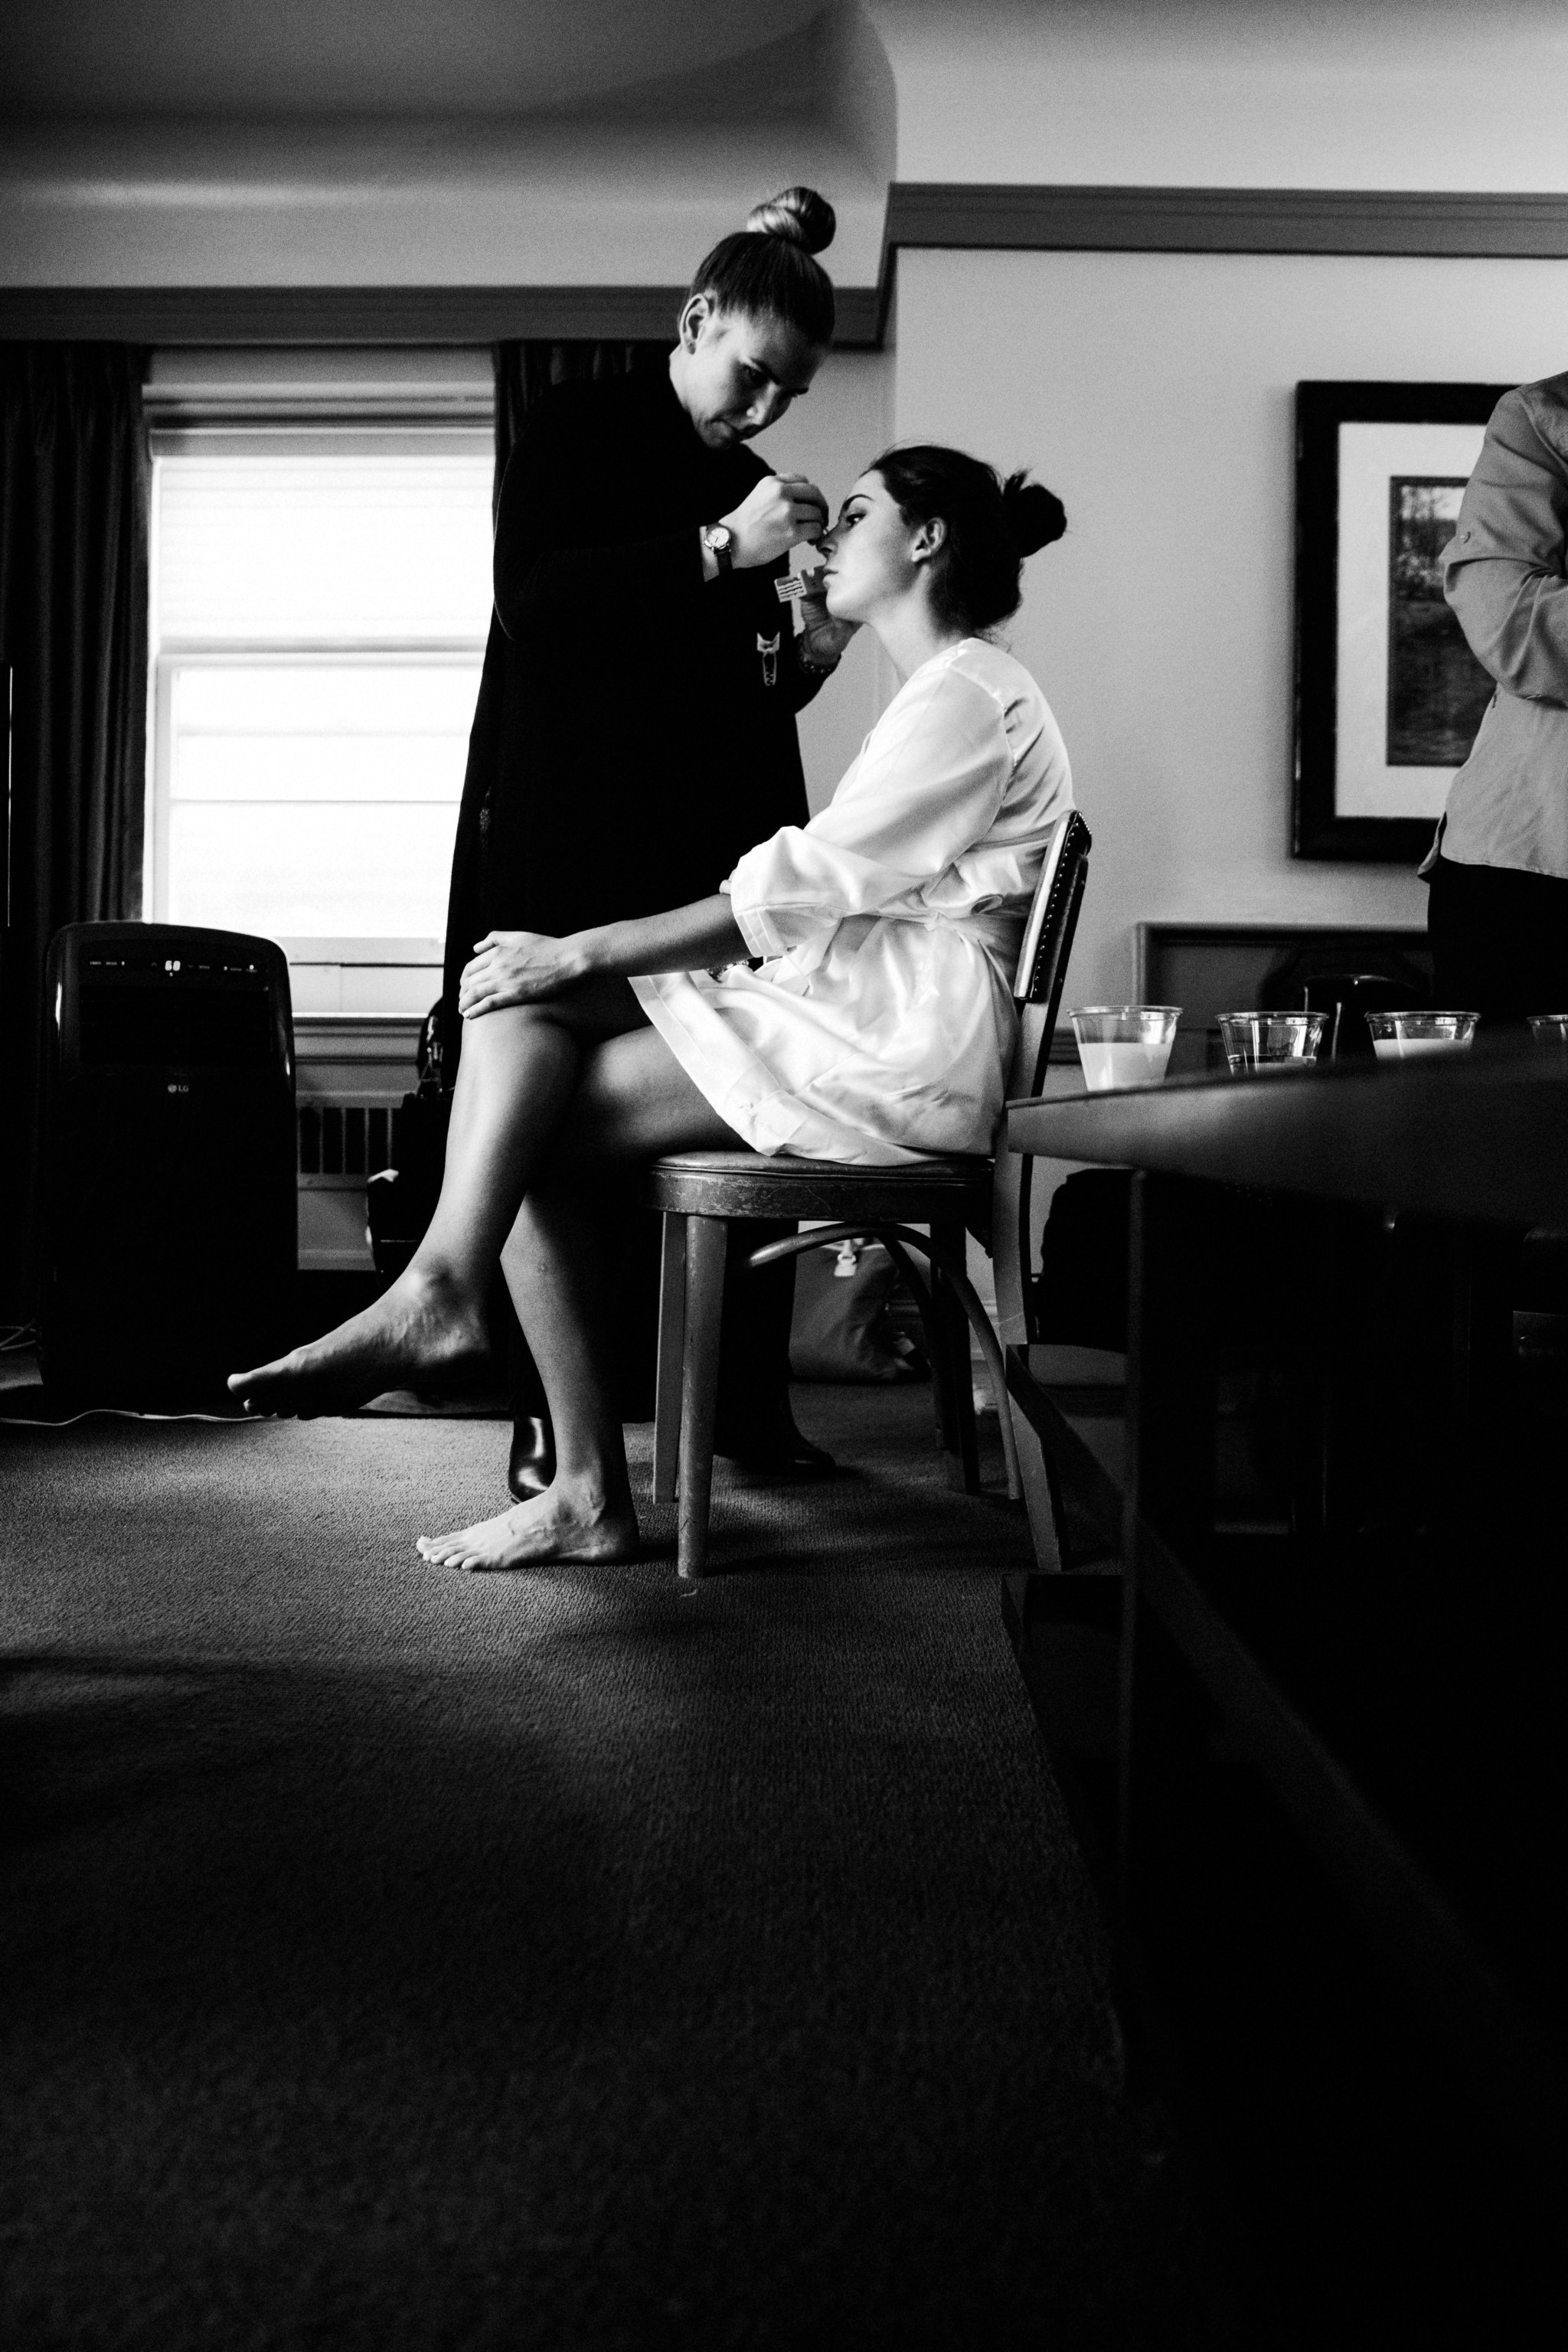 black and white | wedding | wedding photos | wedding photography | images by feliciathephotographer.com | Country Club Plaza | Kansas City | Unity Temple | wedding prep | getting ready | candid | White Carpet Brides | hair and makeup 